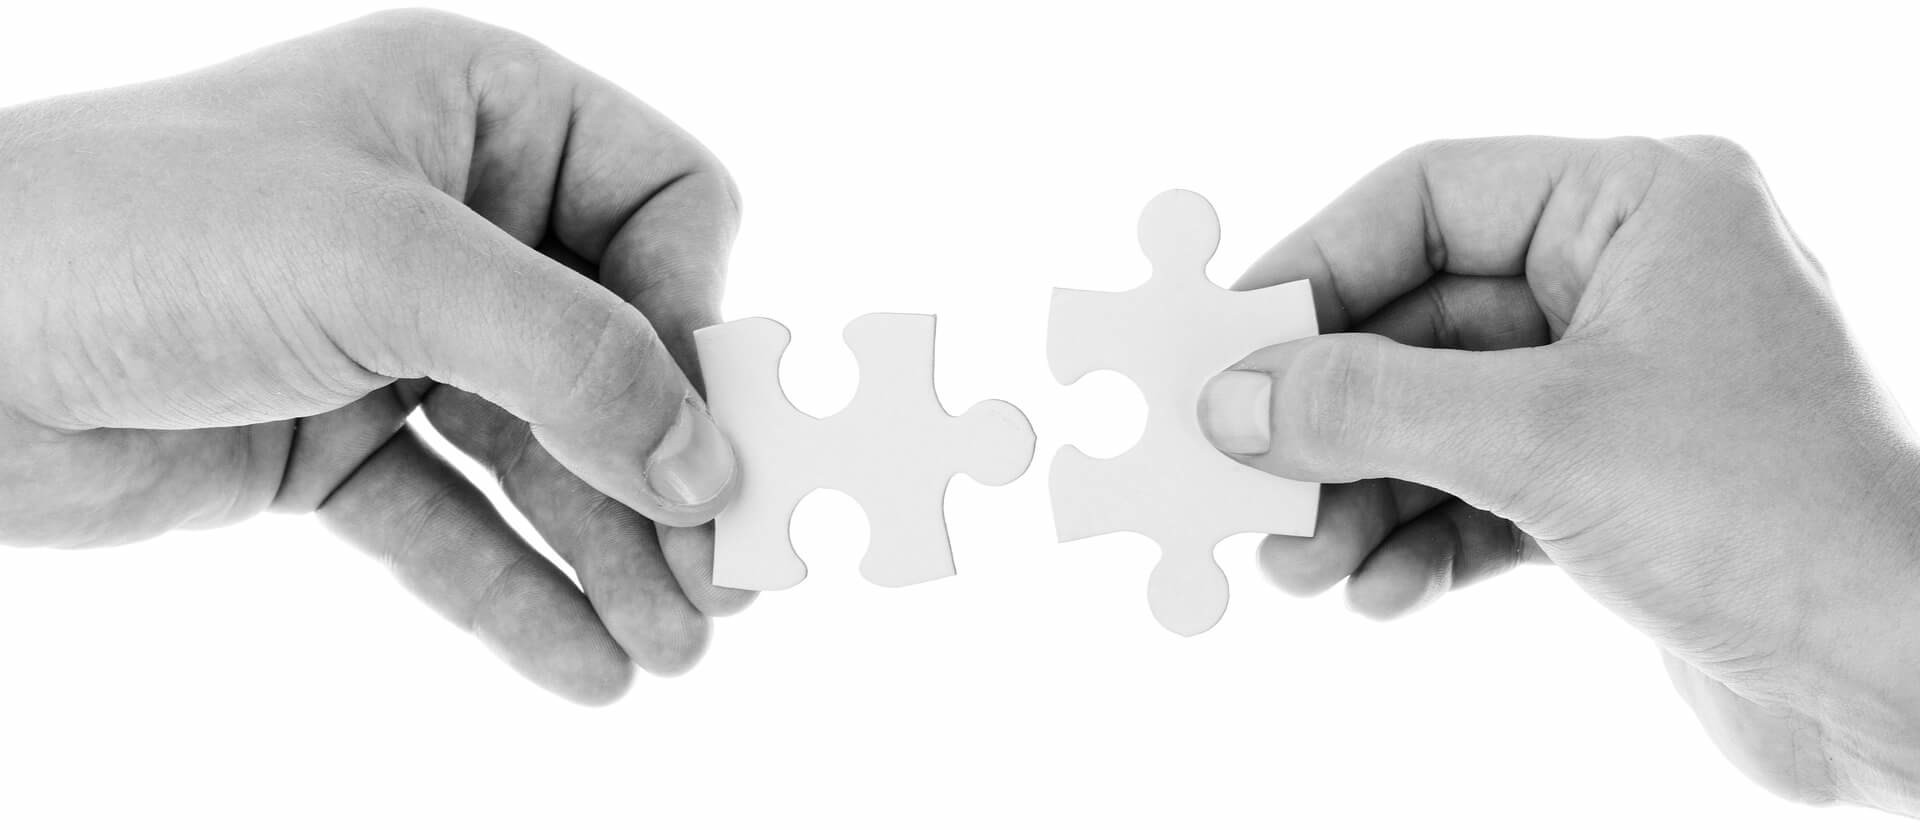 Two hands holding a puzzle piece